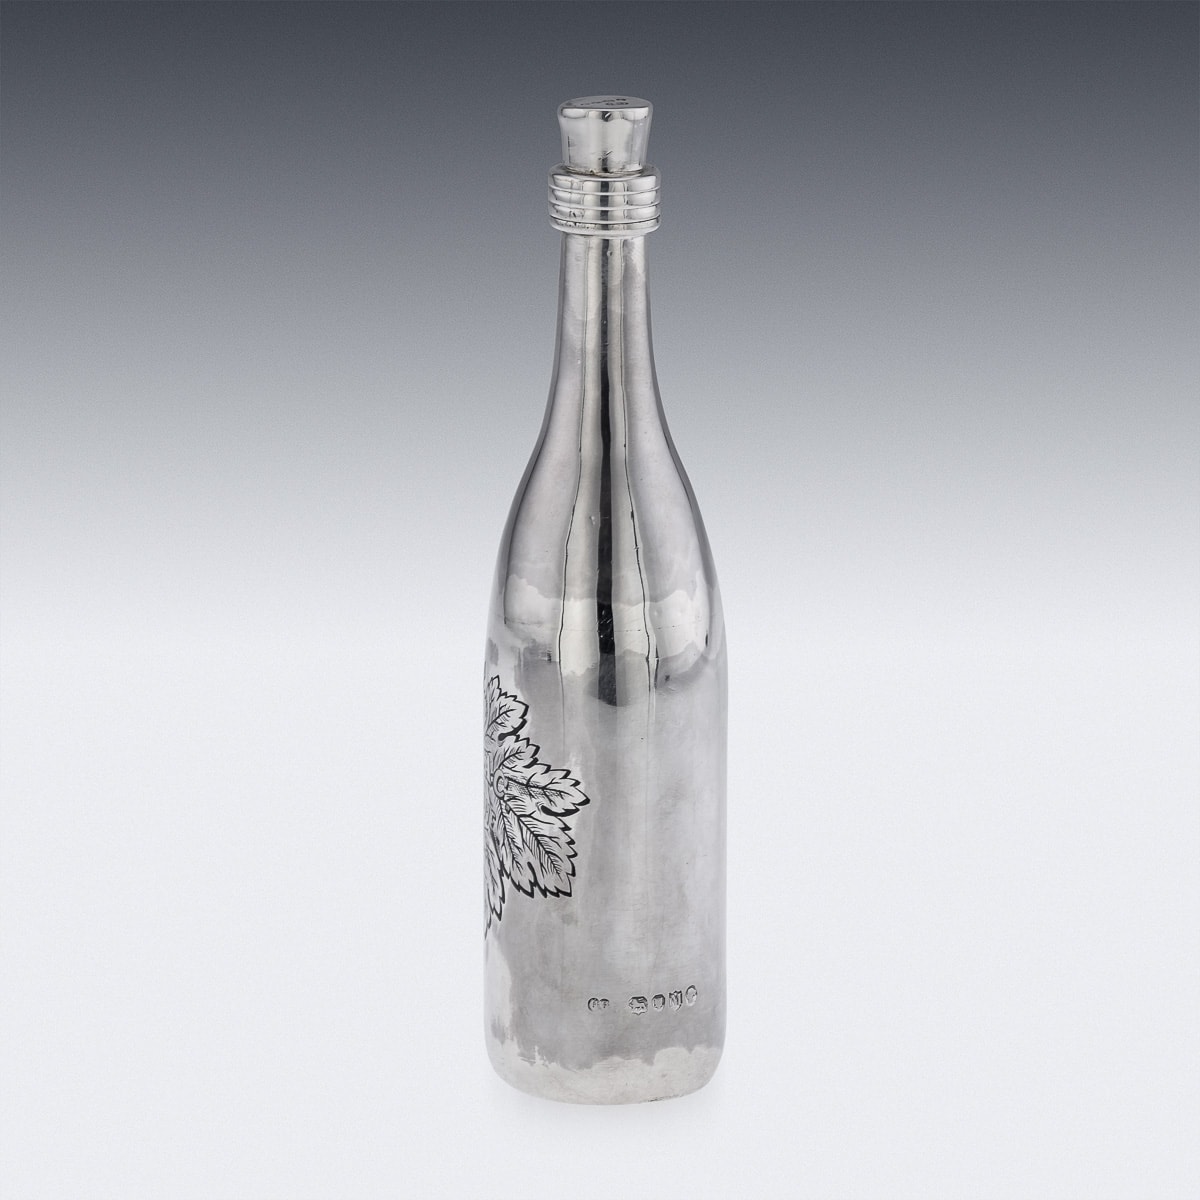 A 19TH CENTURY STERLING SILVER AND ENAMEL COGNAC BOTTLE C. 1887 - Image 6 of 18